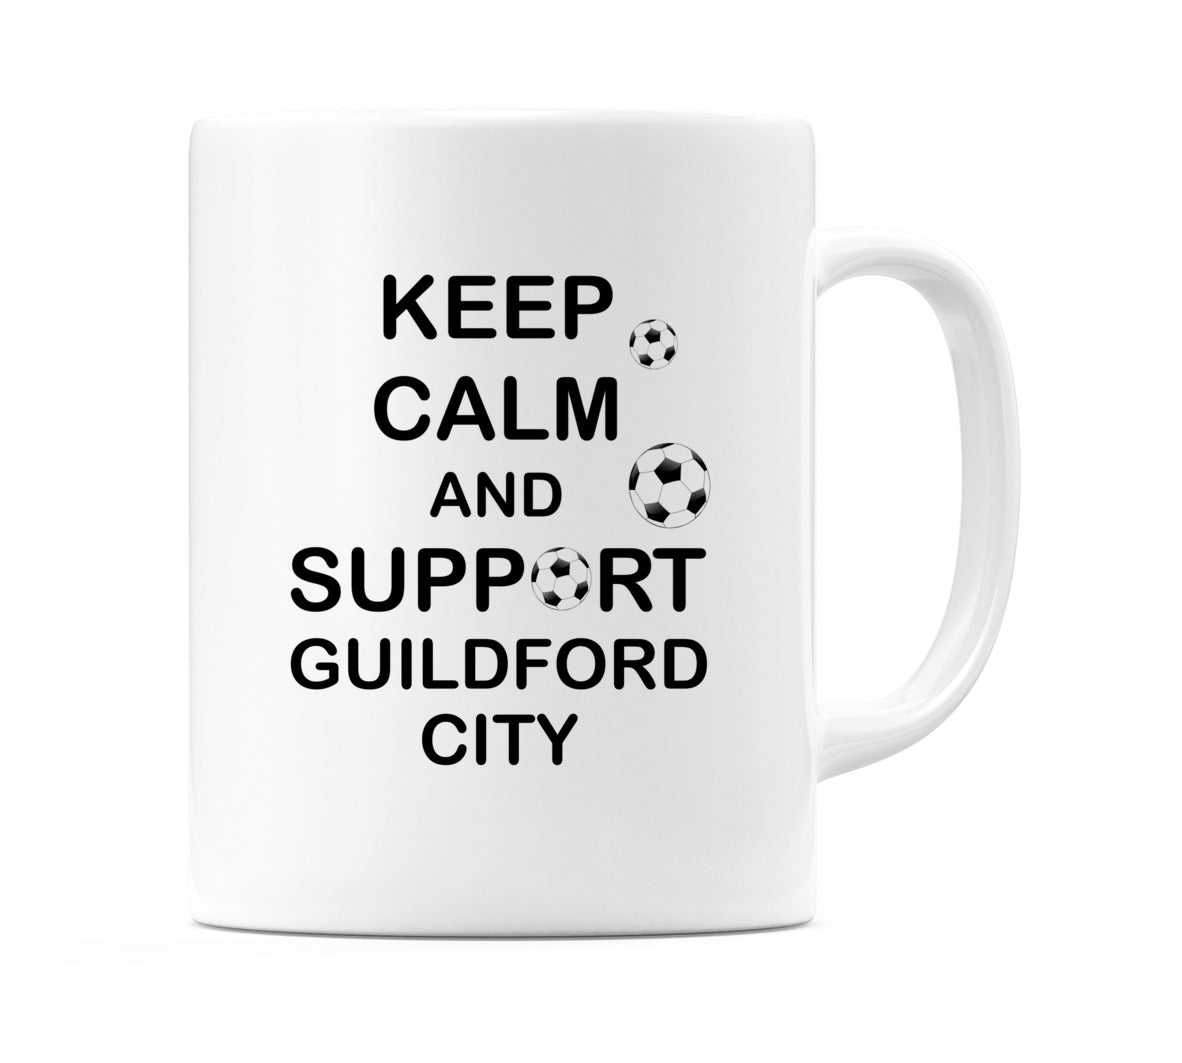 Keep Calm And Support Guildford City Mug